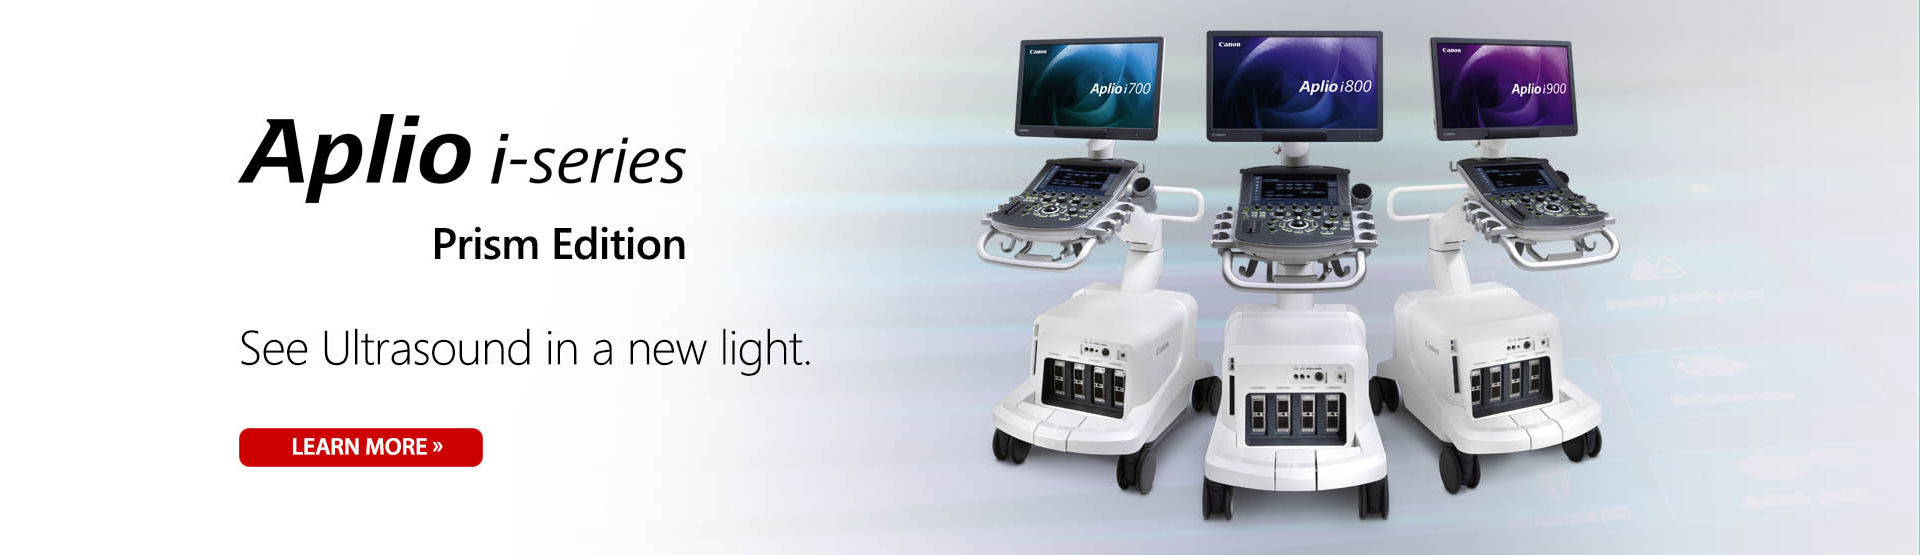 Aplio i-series / Prism Edition | See Ultrasound in a new light. | Learn More